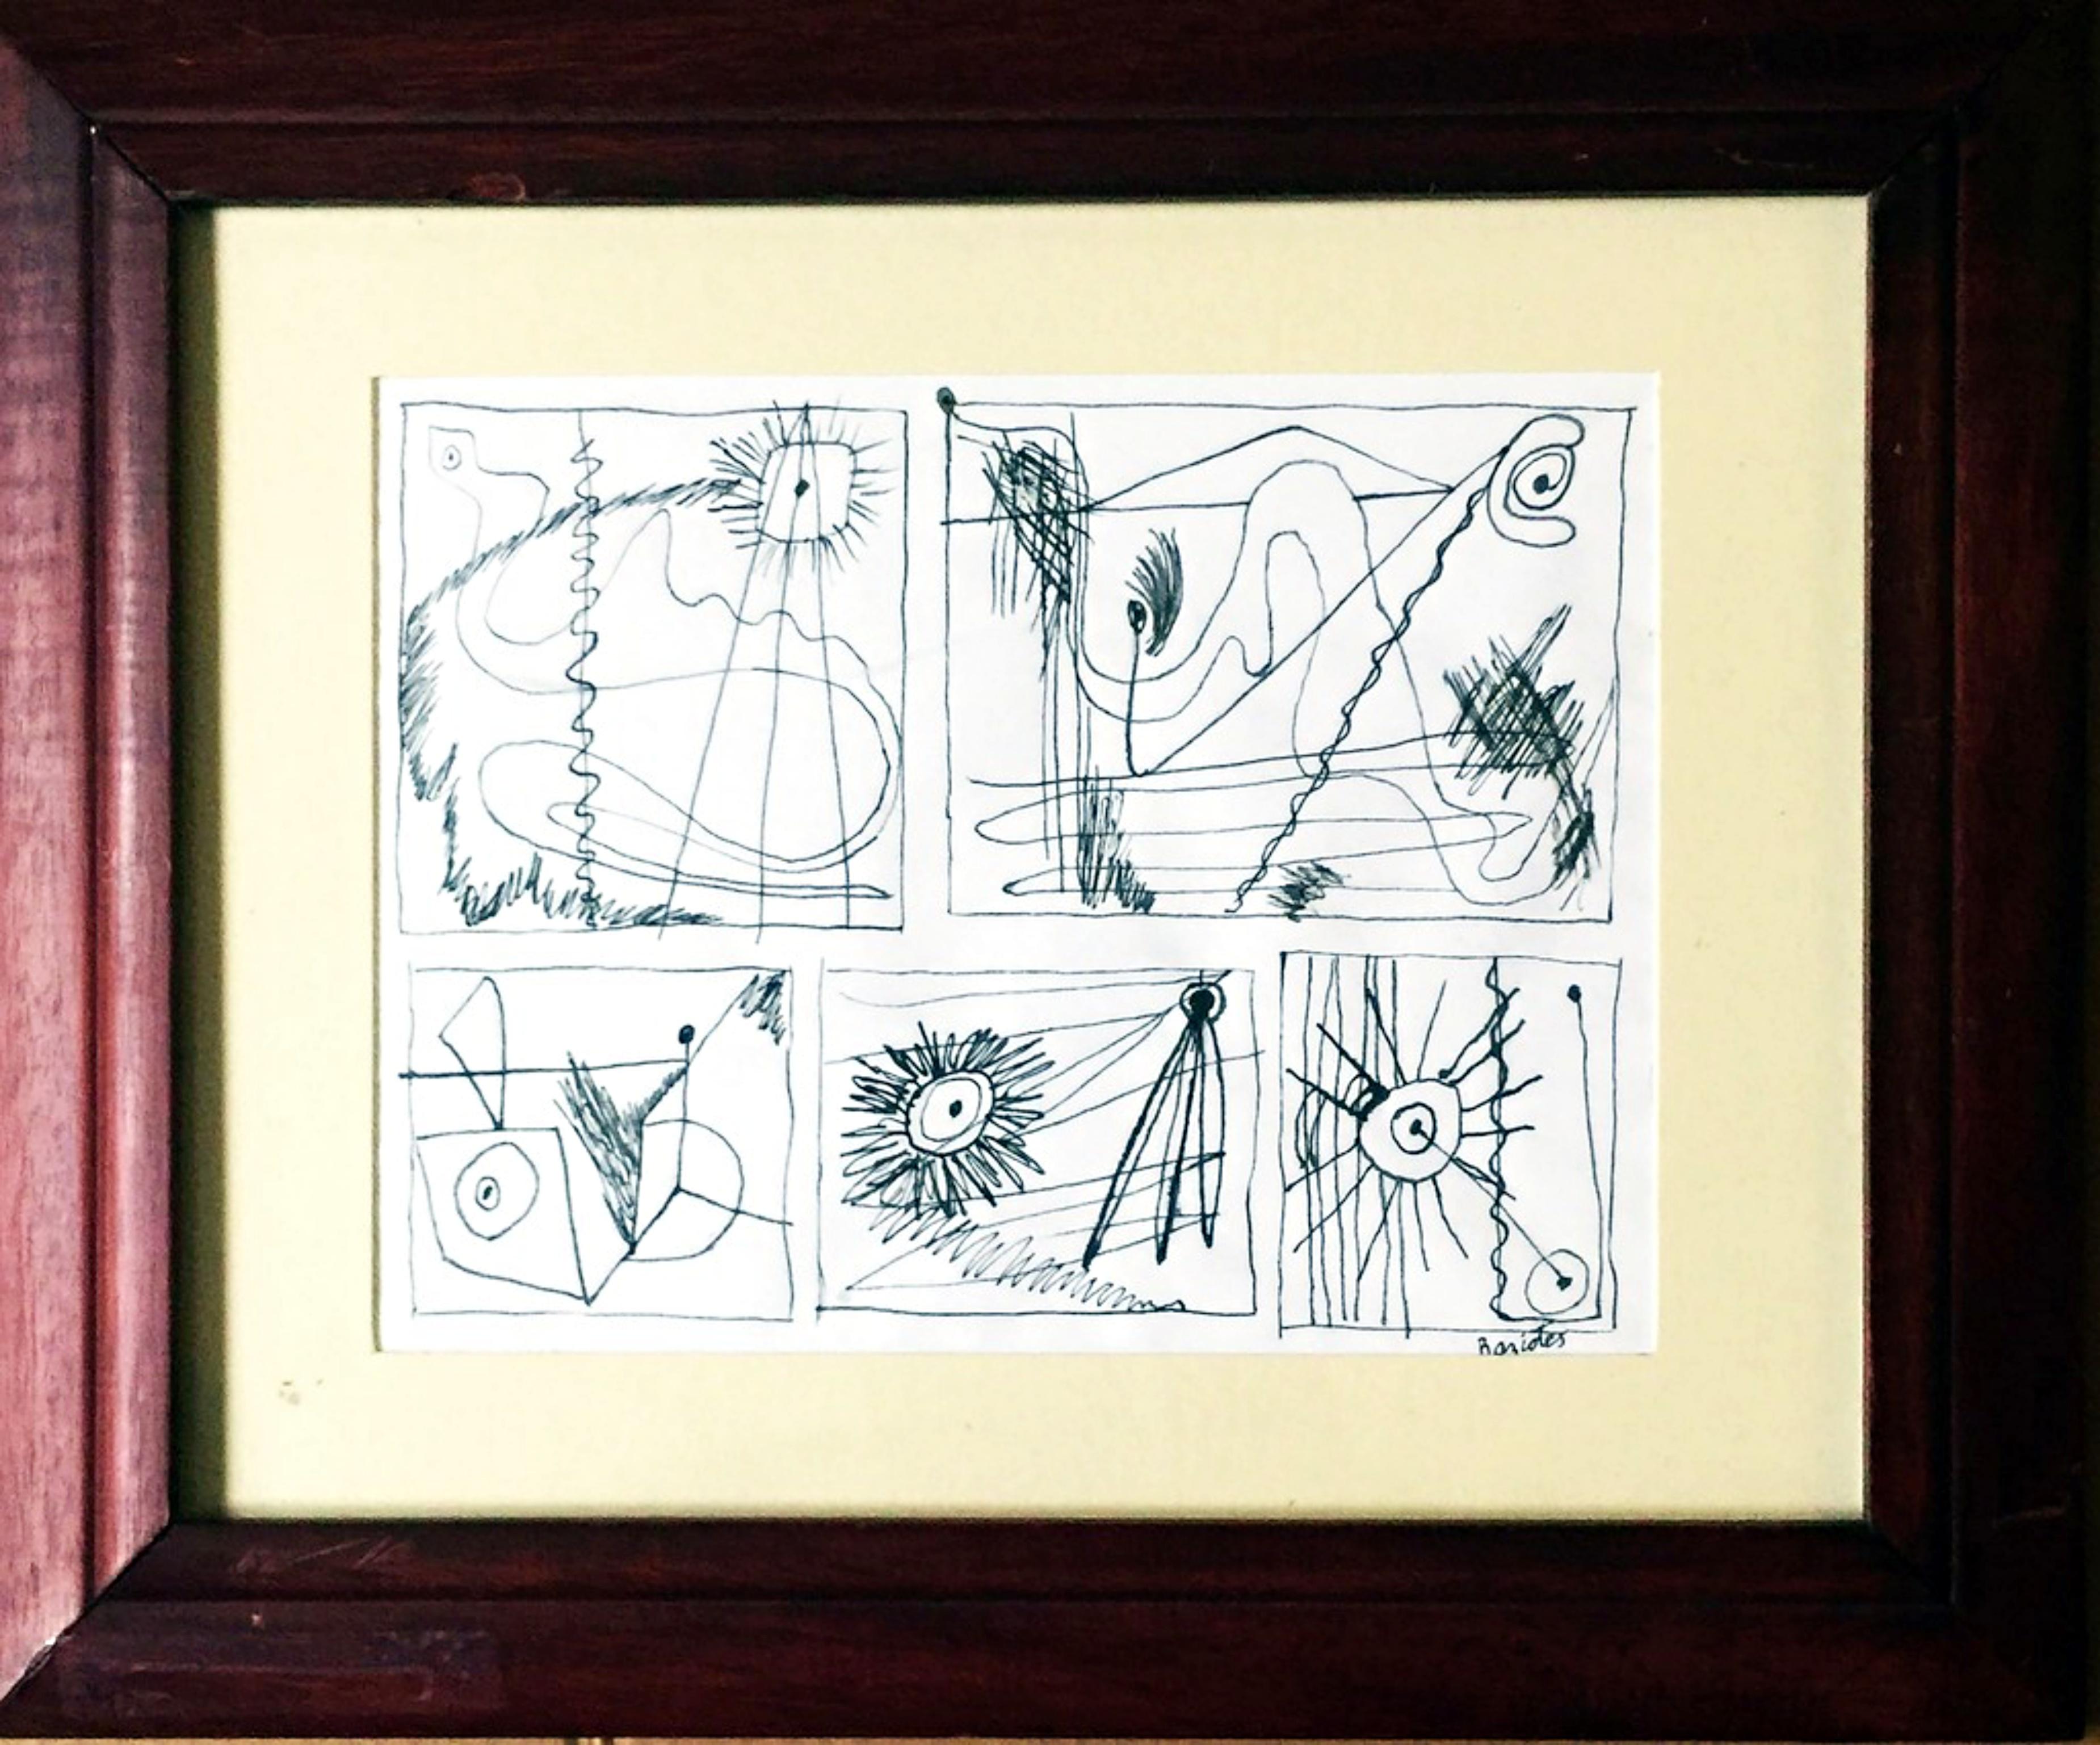 Unique SIGNED Abstract Expressionist drawing major WPA artist, Estate issued COA - Art by William Baziotes